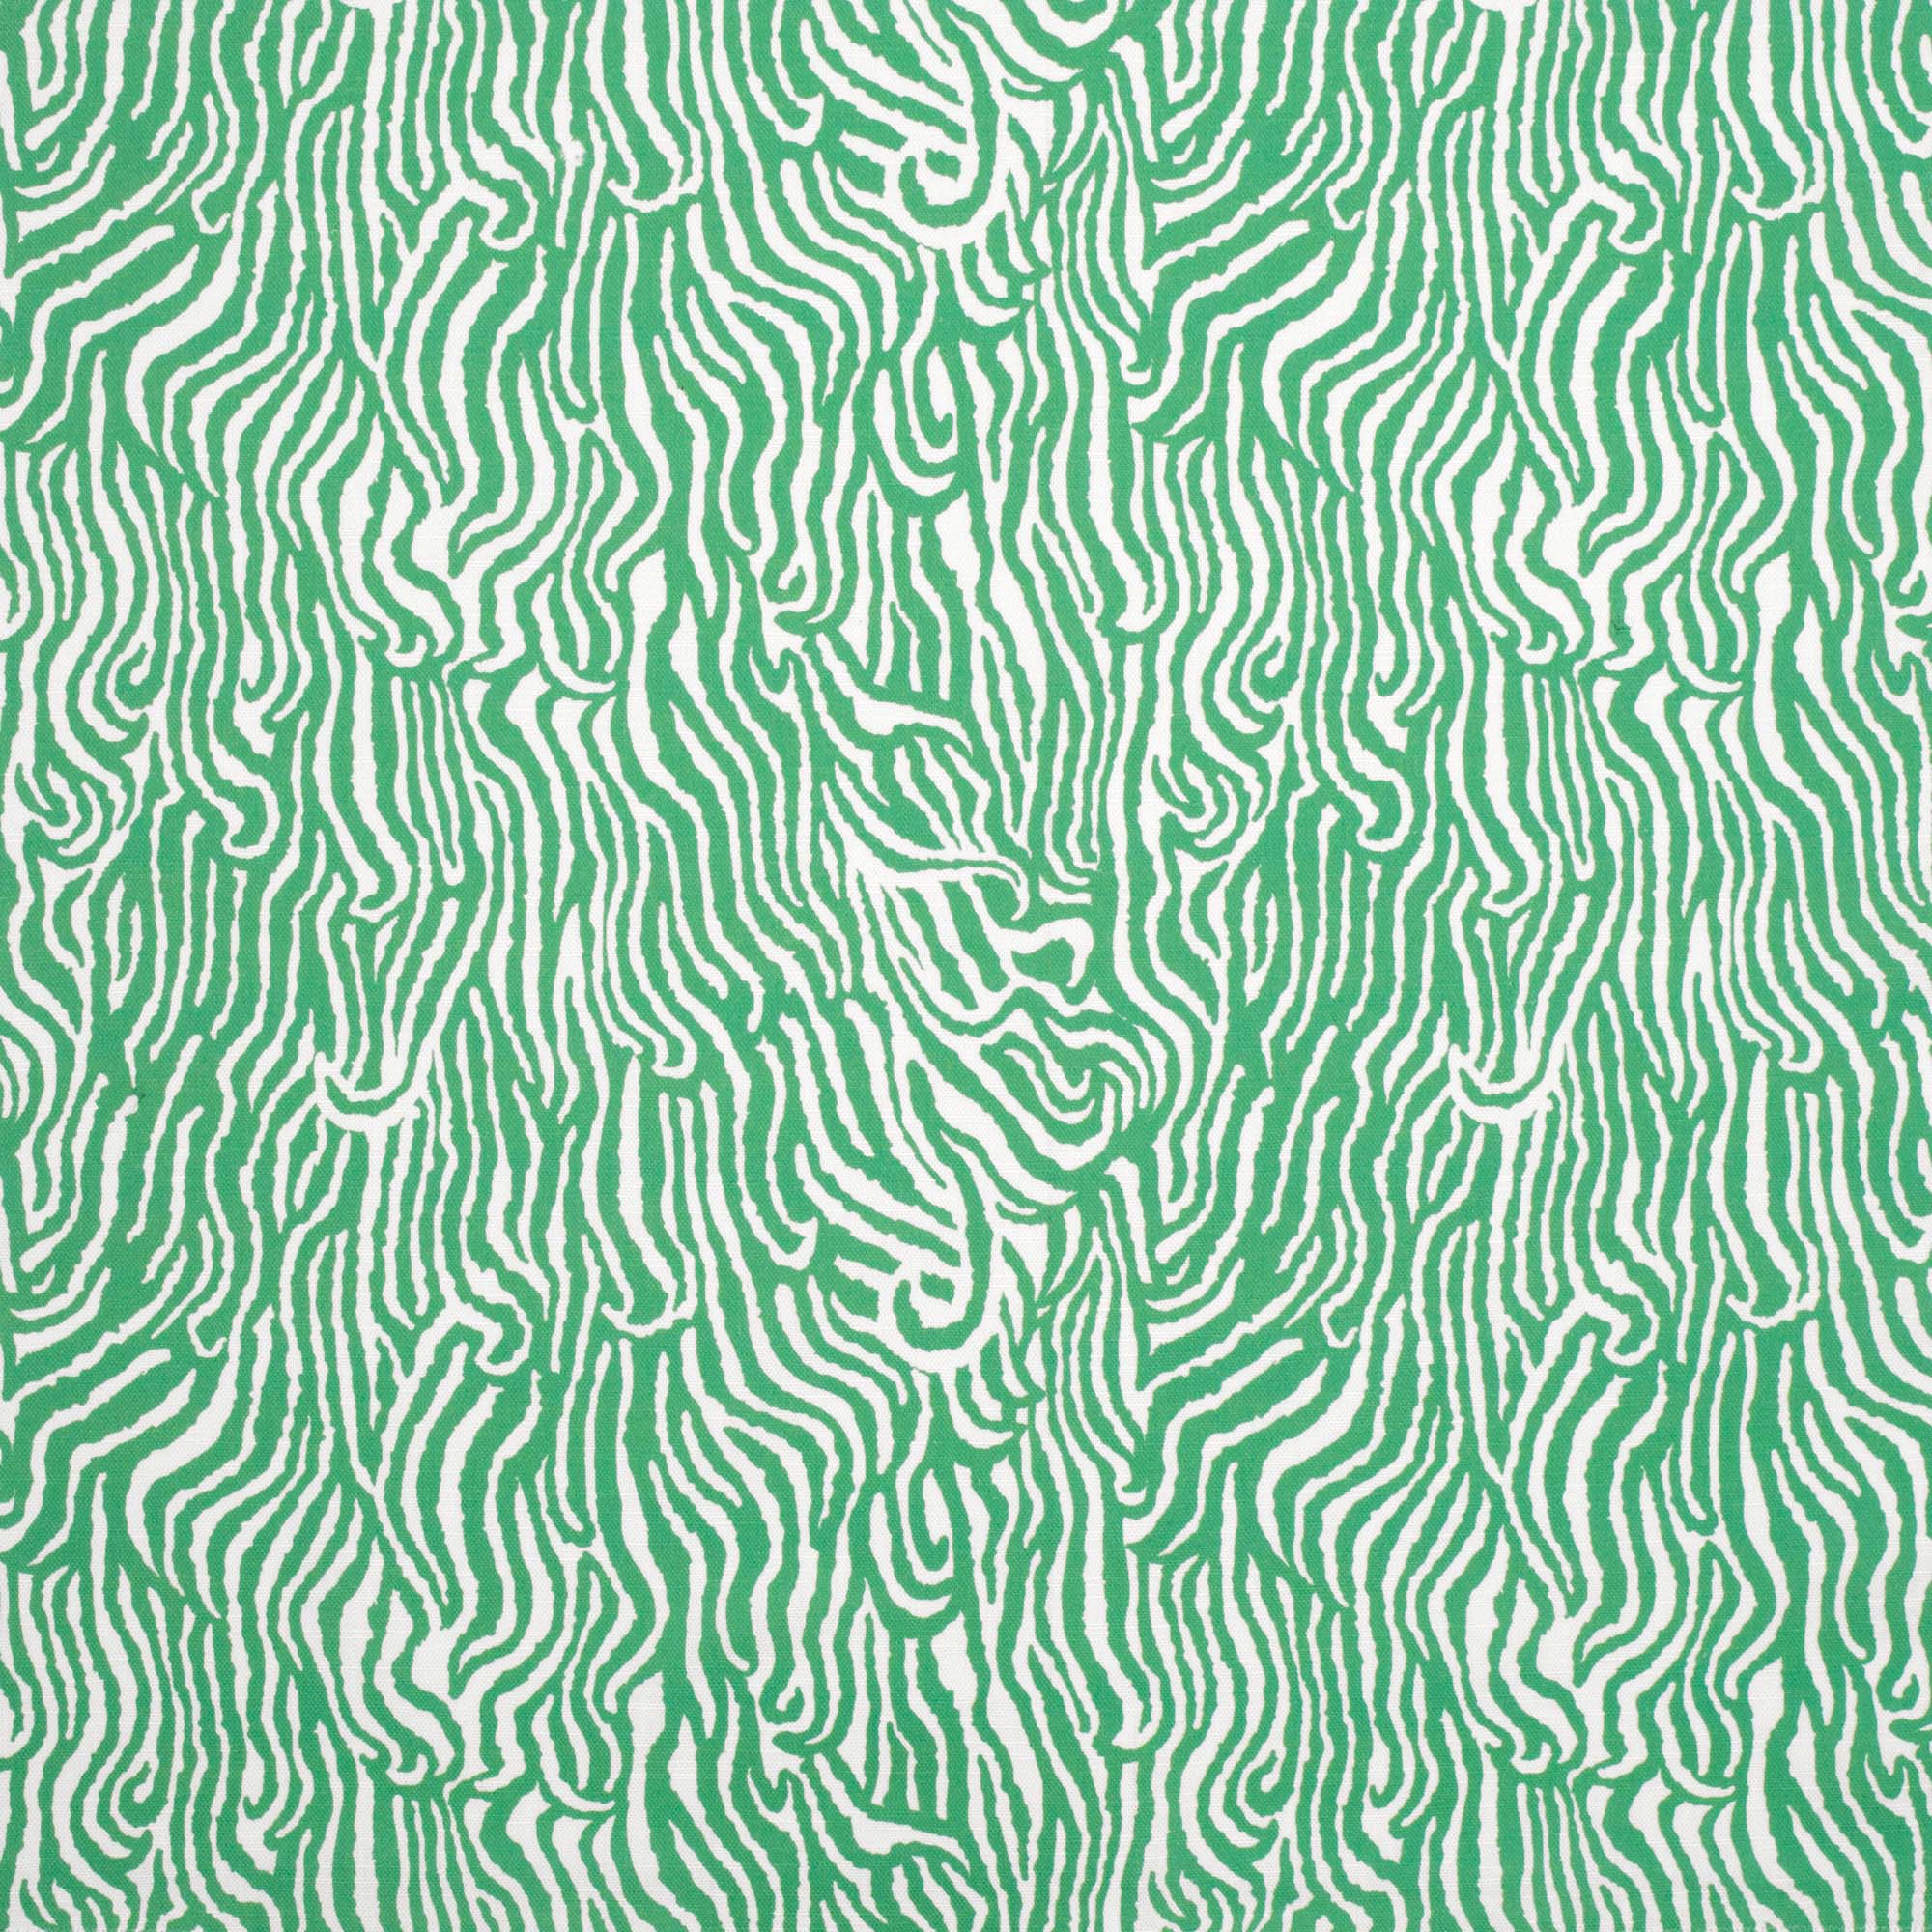 Detail of fabric in a playful animal print in light green on a white field.